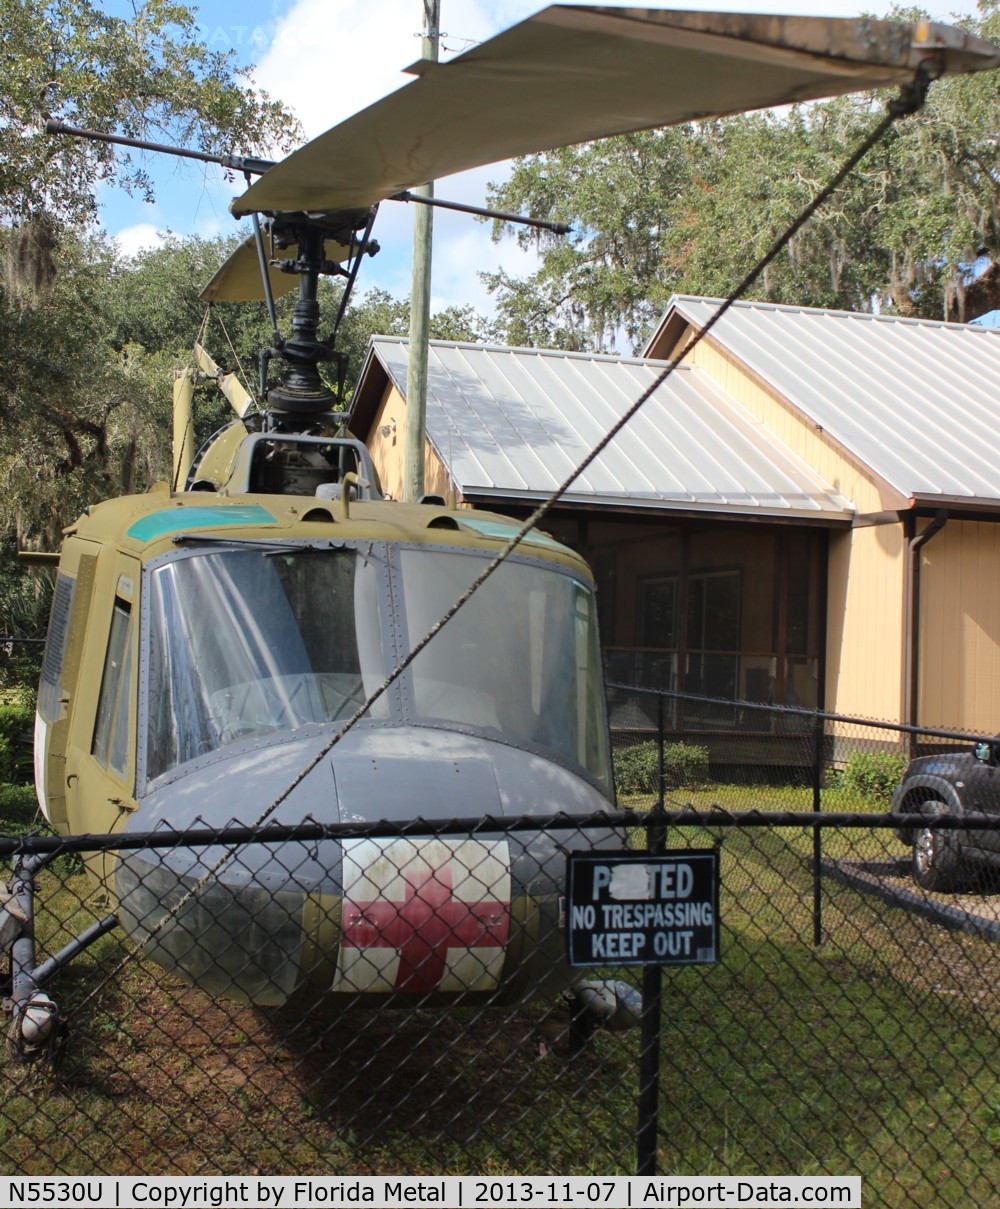 N5530U, Bell TH-1L C/N 157848, TH-1L Iroquois at a Veterans hall in Tallahassee